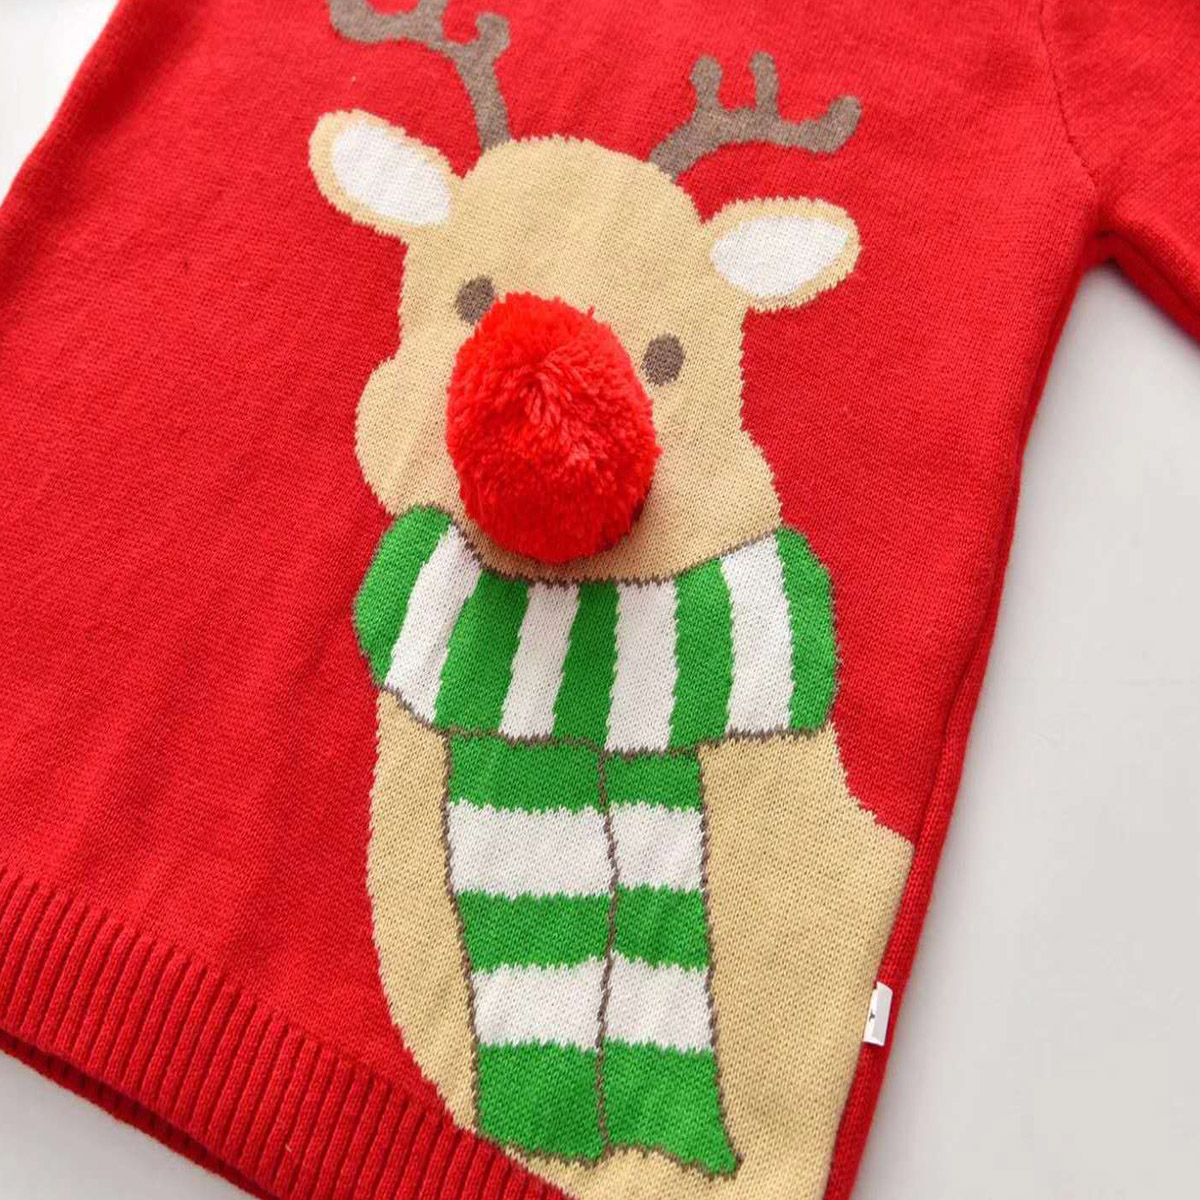 1-6Years Christmas Baby Girls Boys Sweaters Snowman Print Long Sleeve Pullover Knit Warm Tops